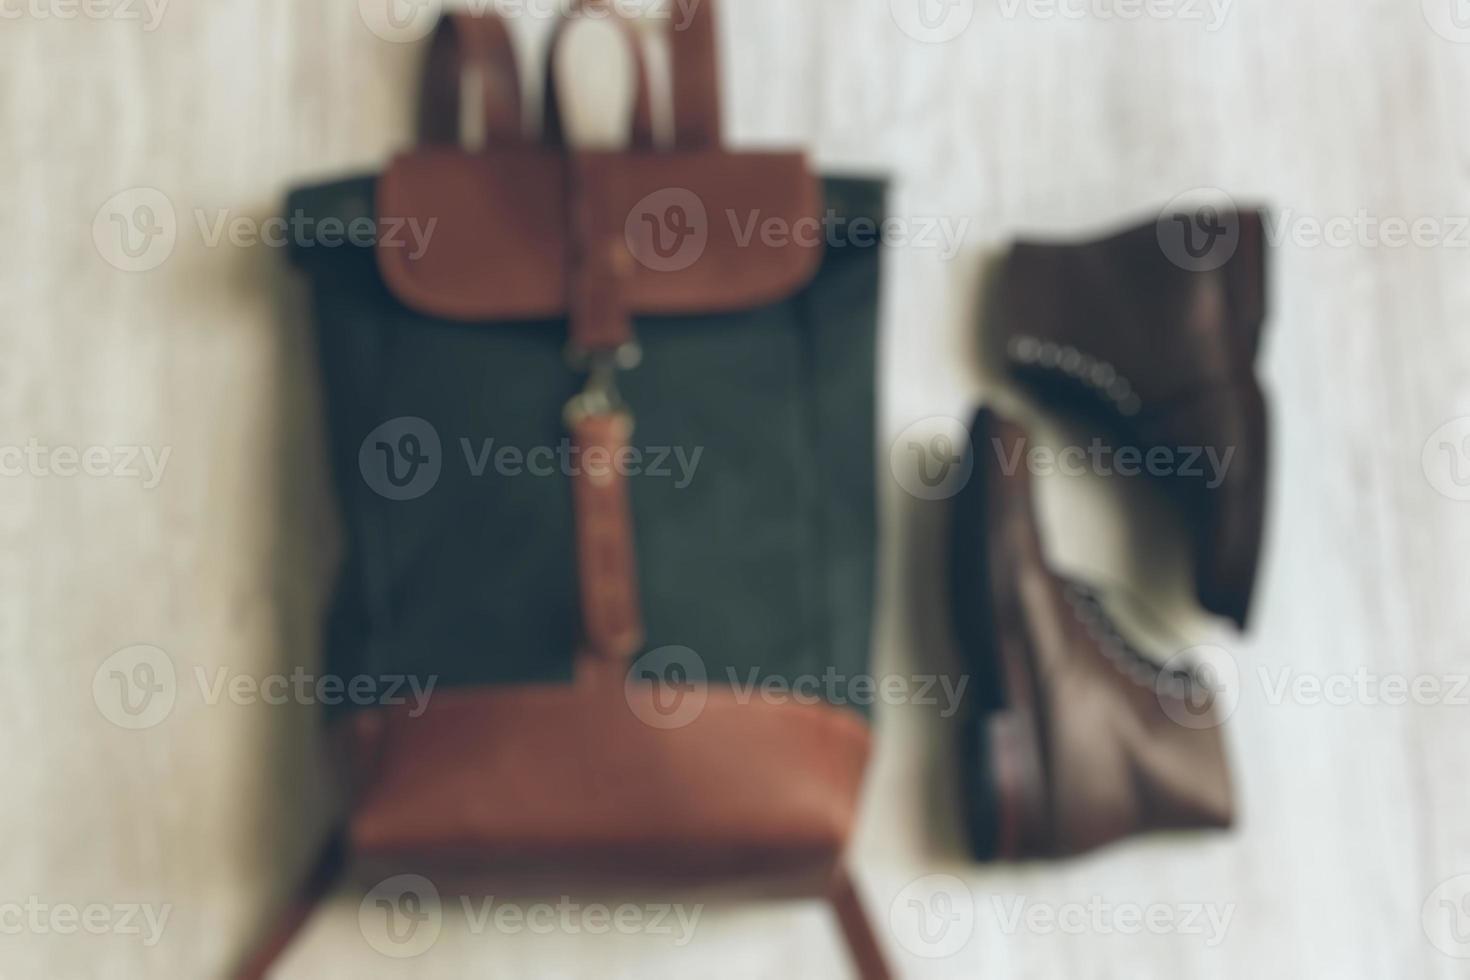 Blurred. Leather Bag. A handbag or sling bag made of brown leather in a minimalist style or a minimalist and luxurious retro color. photo